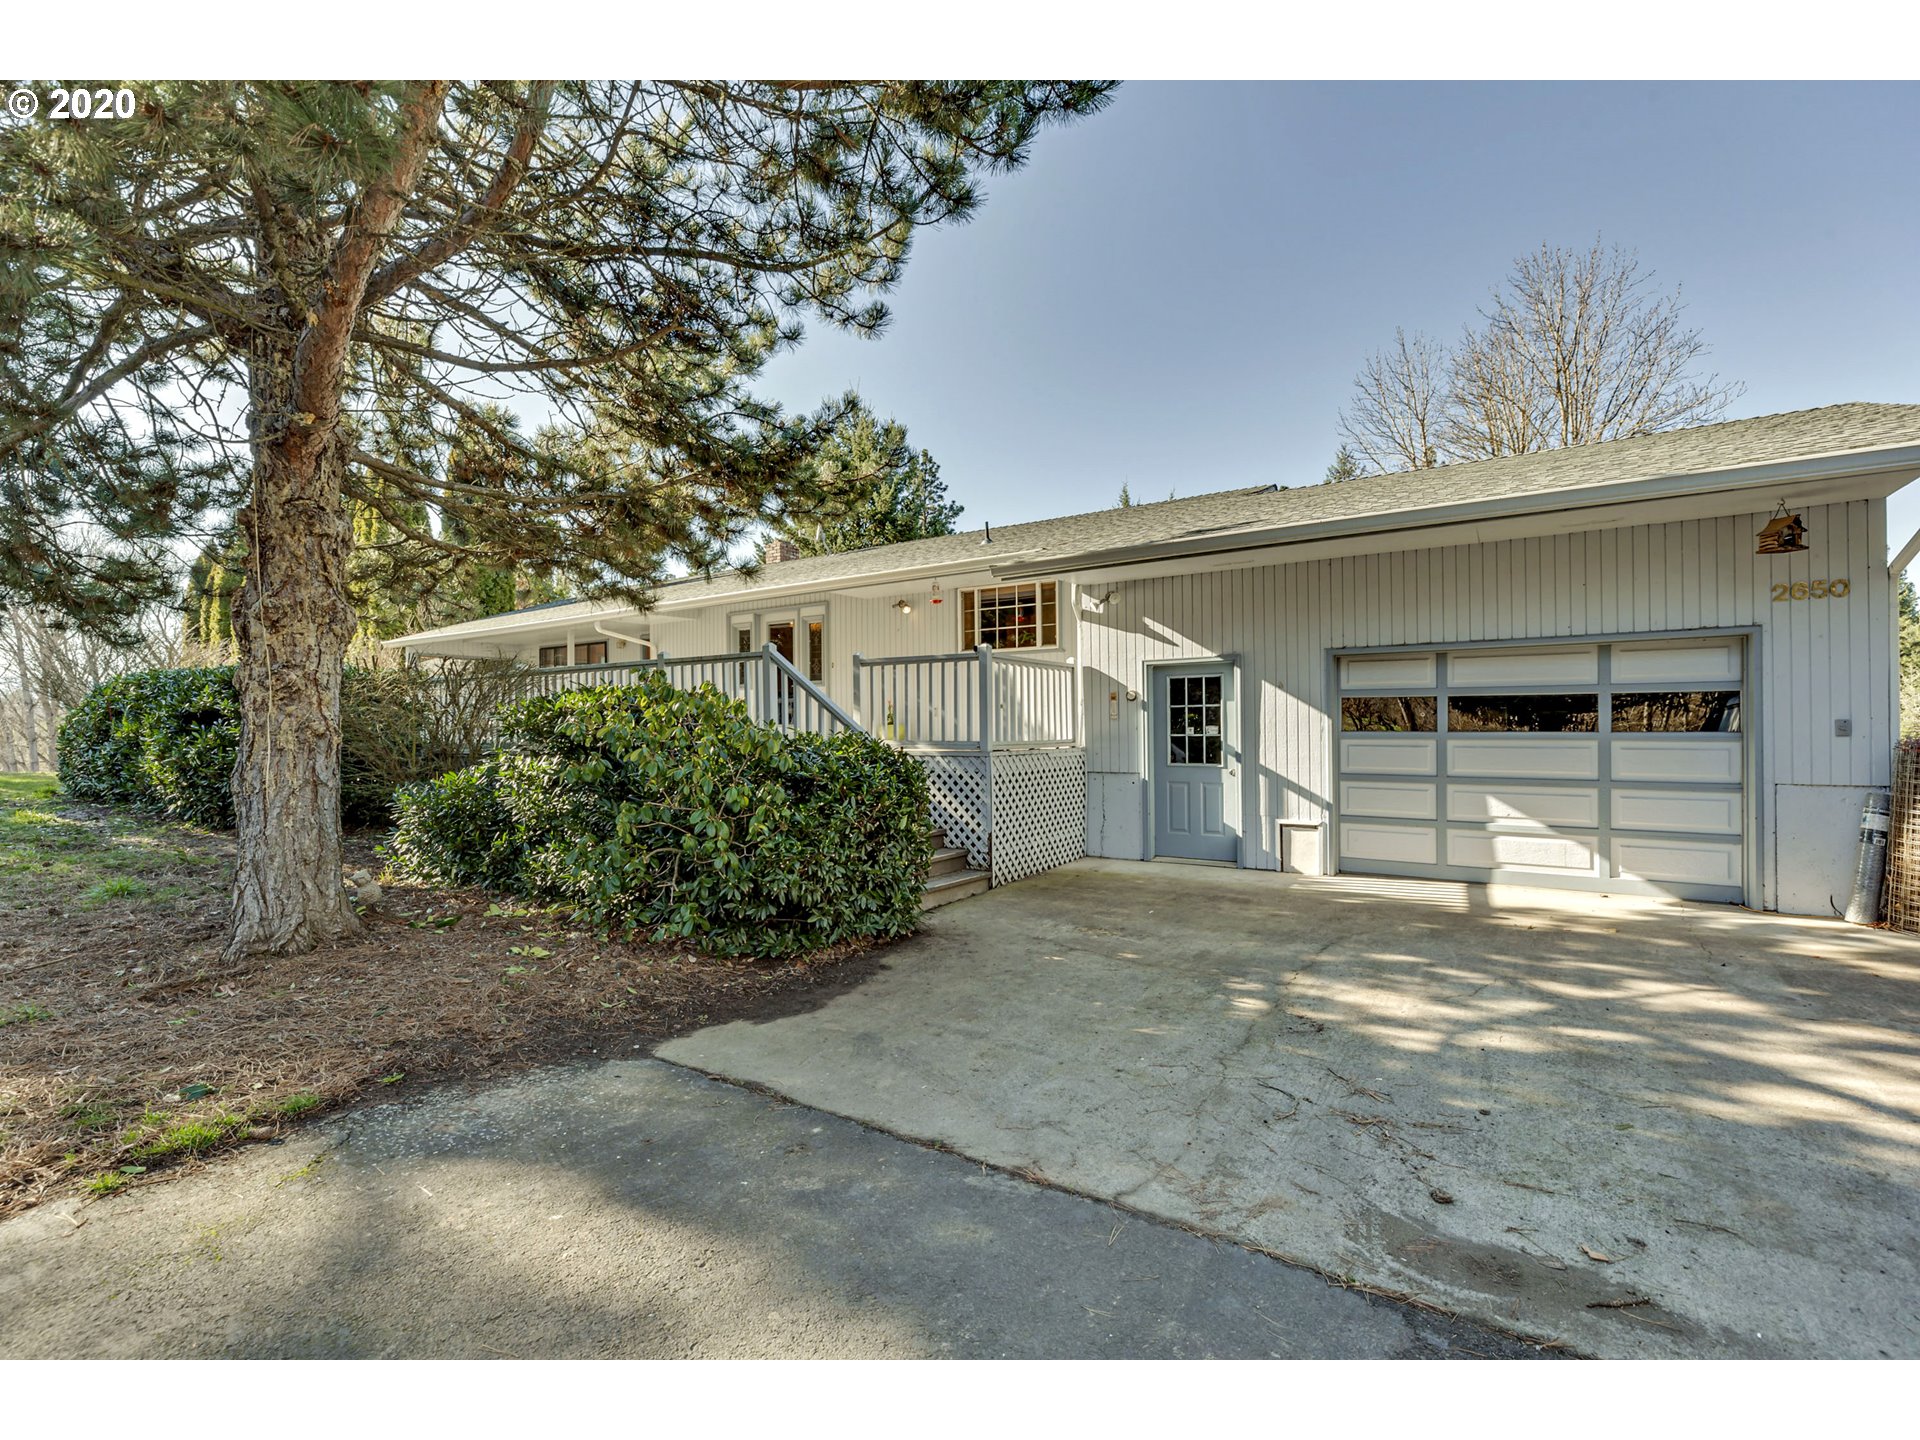 Photo of 2650 BLOSSOM HILL DR Hood River OR 97031